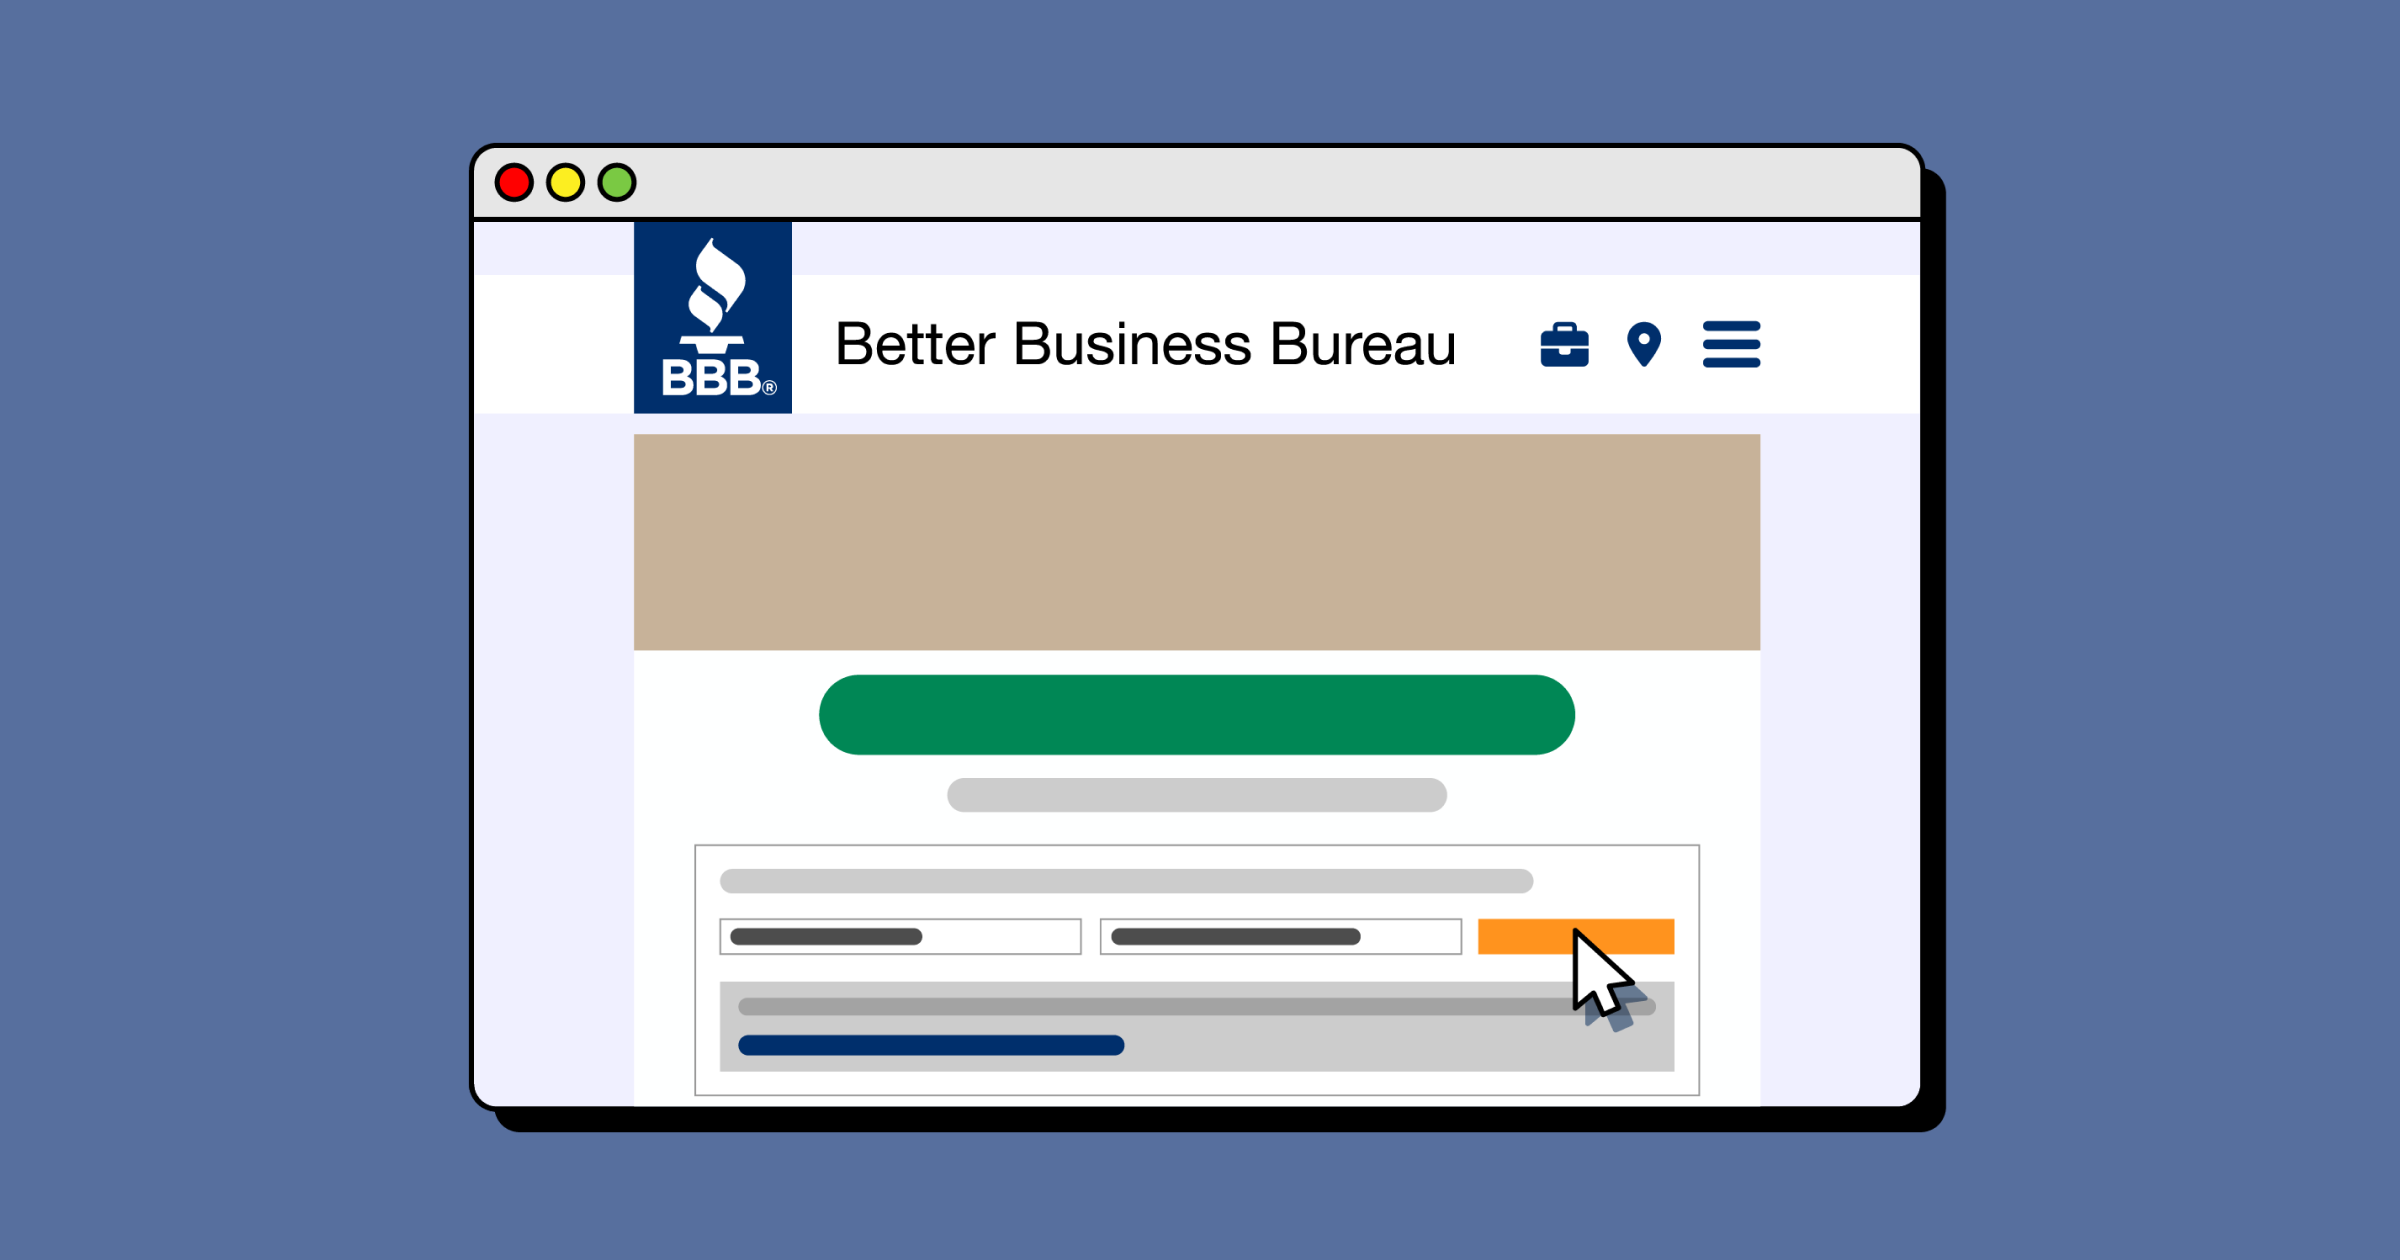 How to Add or Claim Your Better Business Bureau Listing